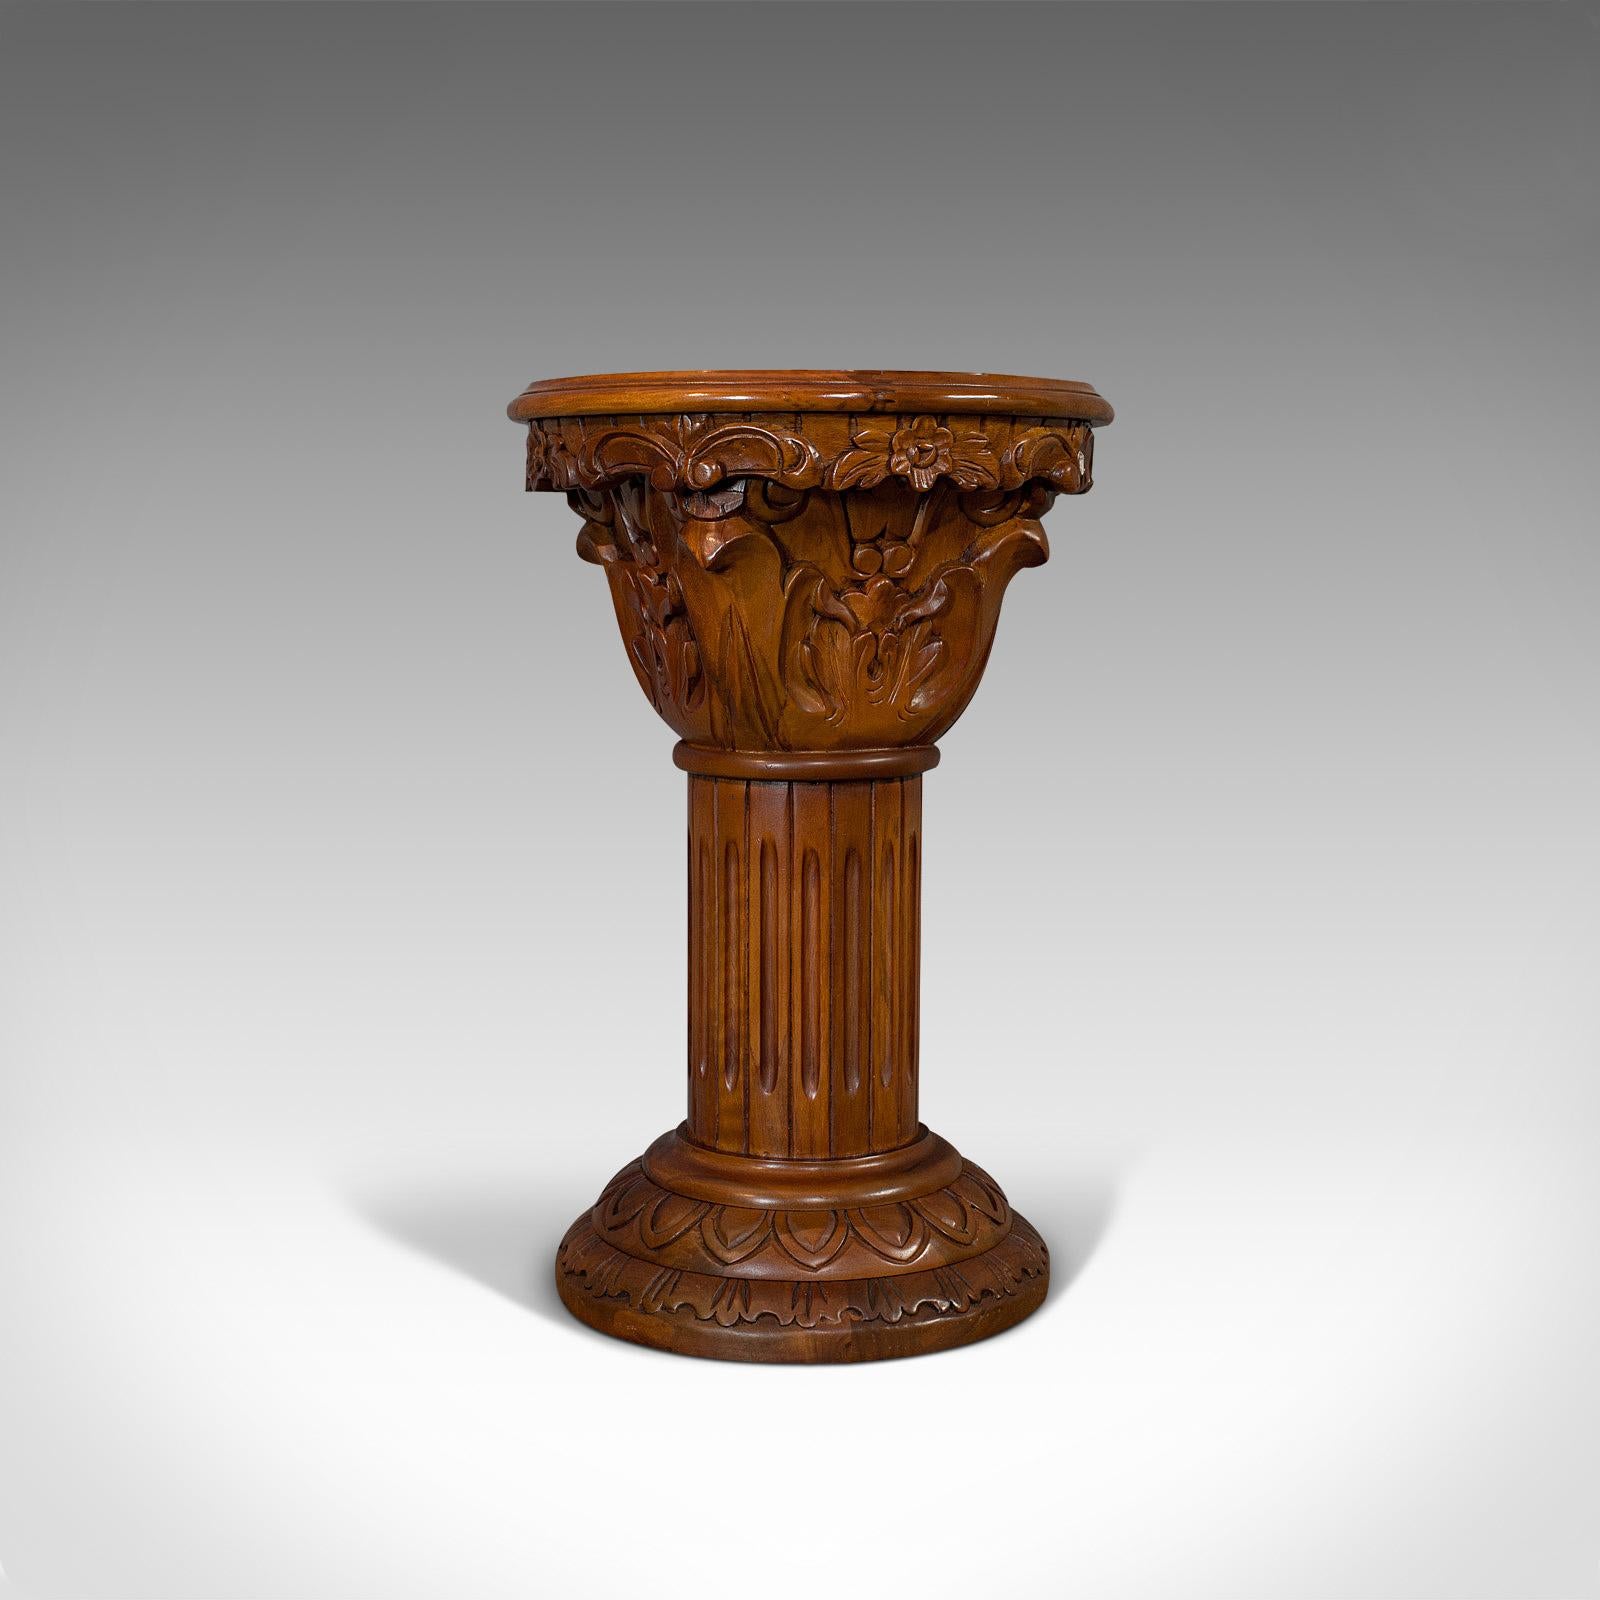 This is a vintage torchere stand. An oriental mahogany and marble jardinière or lamp table, dating to the late 20th century, circa 1980.

Deeply carved stand with appealing color
Displays a desirable aged patina
Select mahogany shows fine grain